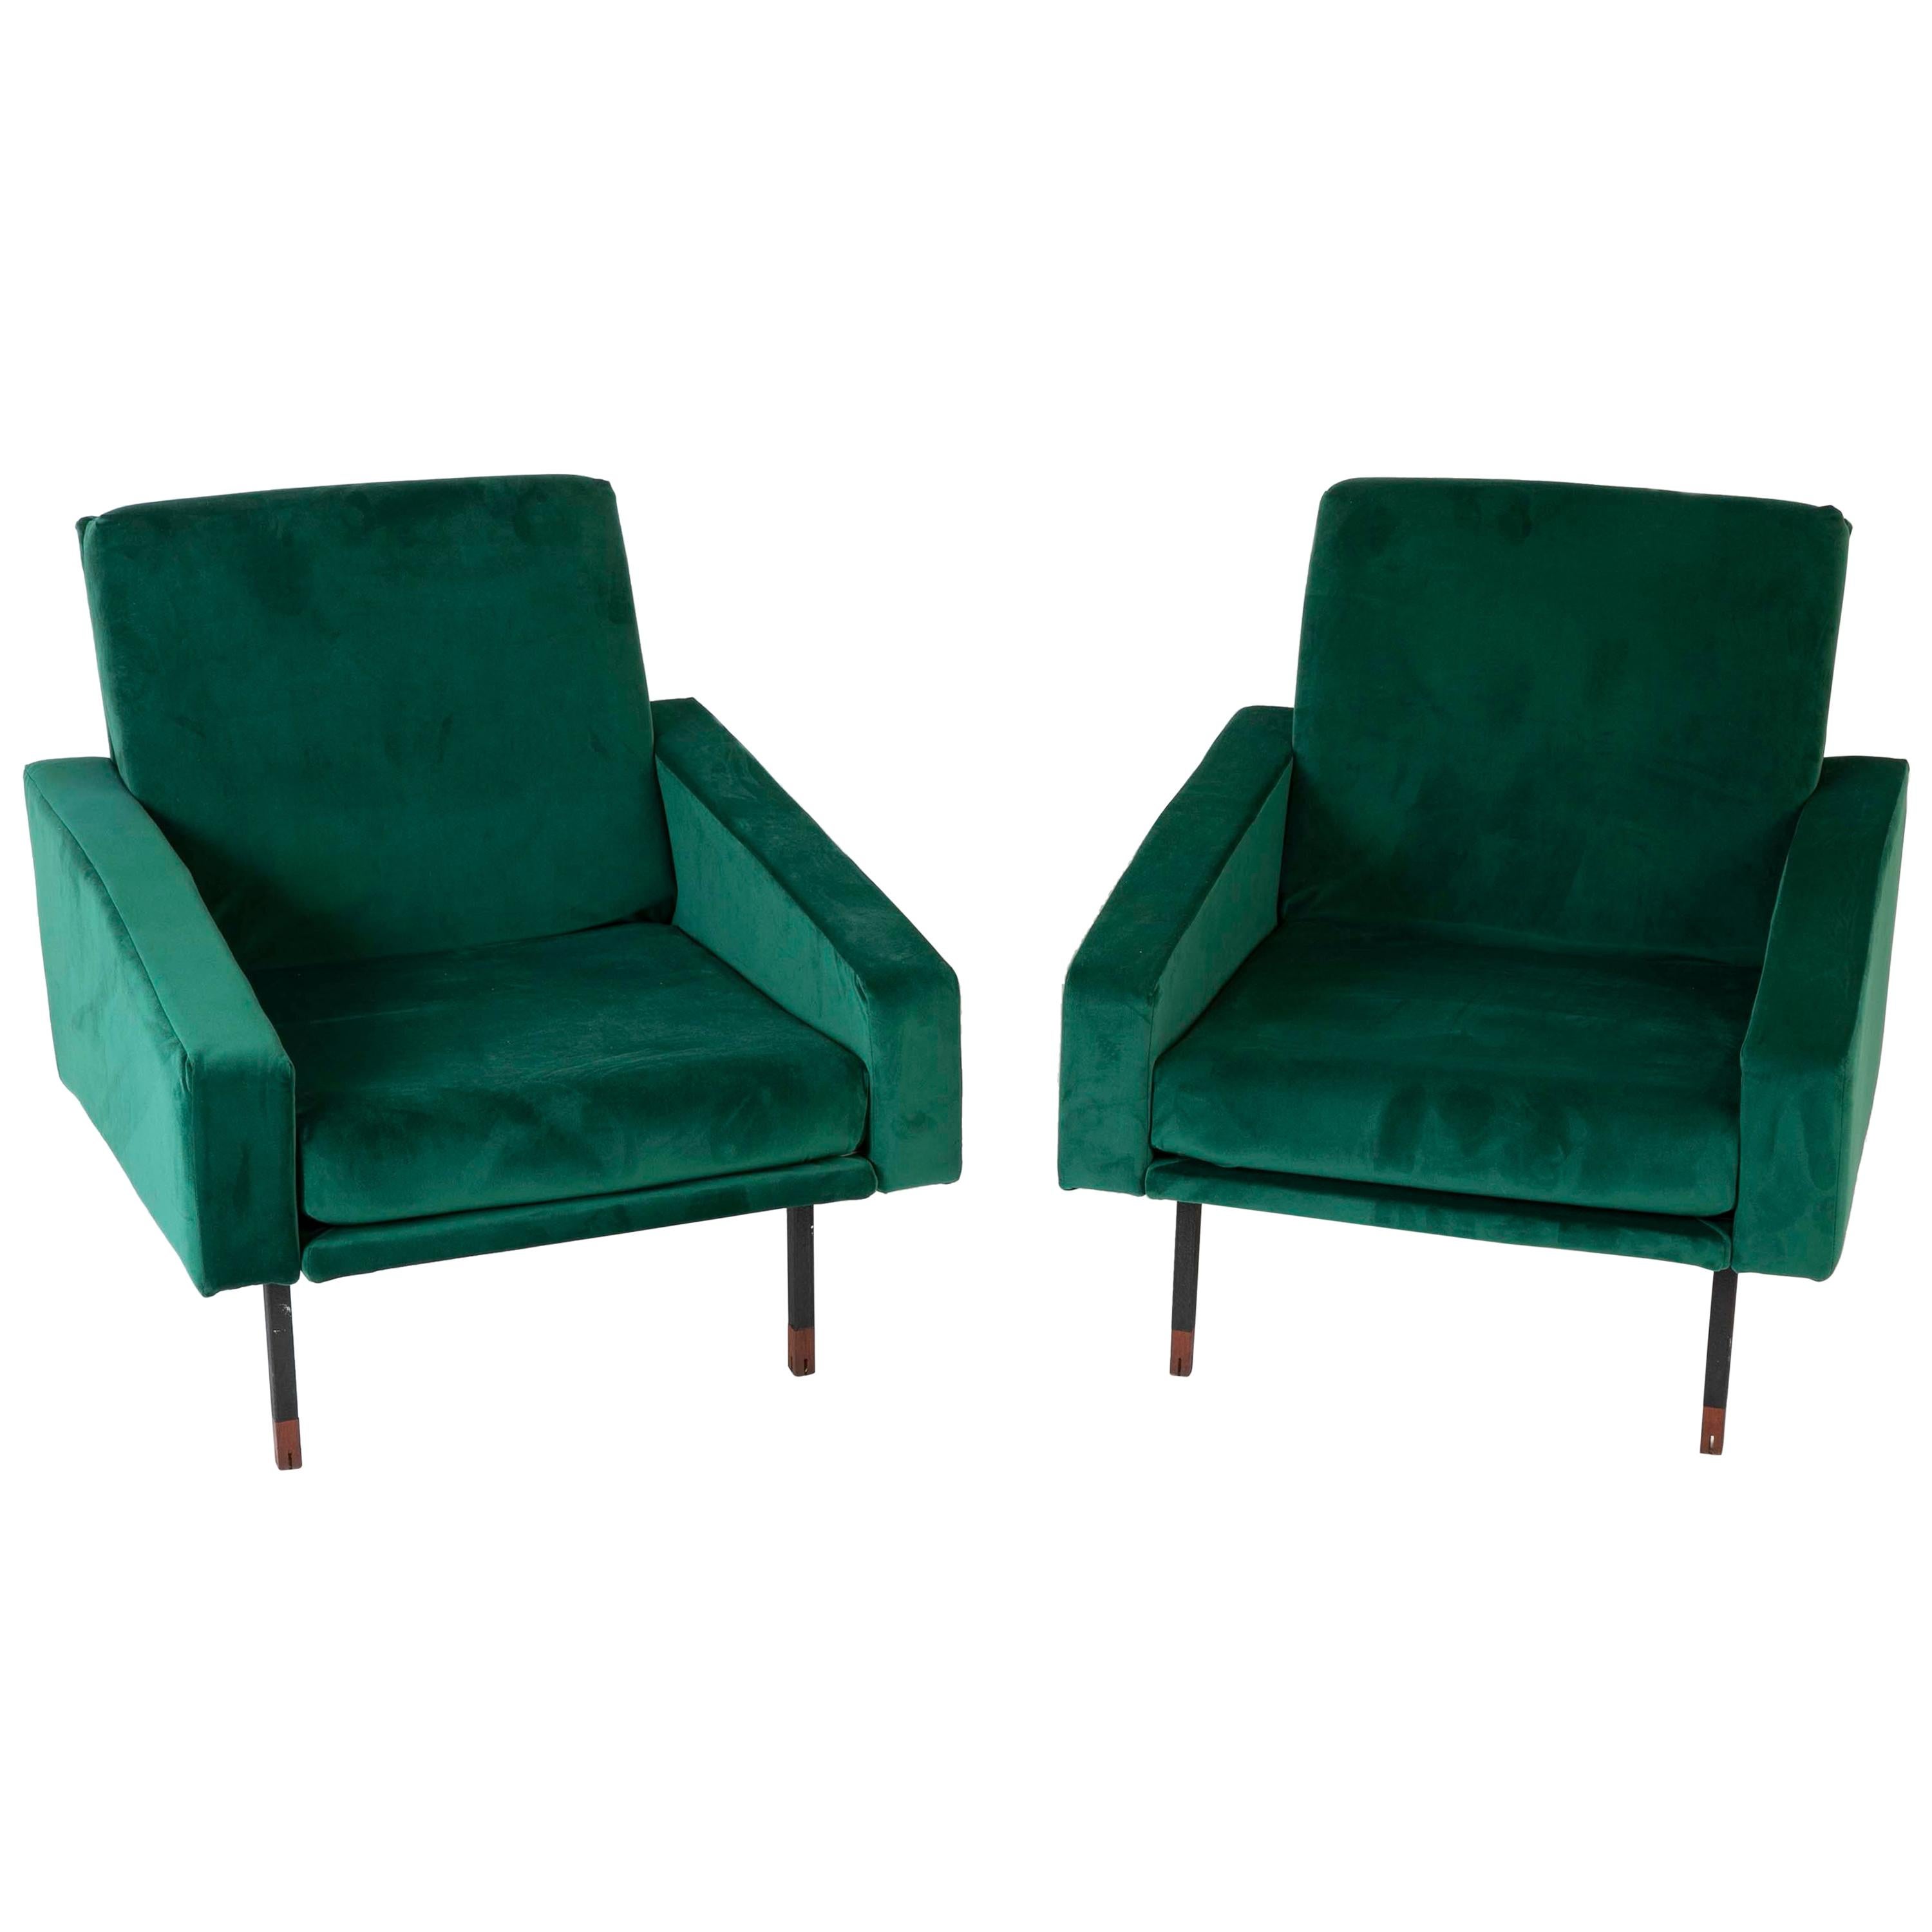 Pair of Upholstered Italian Midcentury Armchairs with Walnut Tipped Legs For Sale